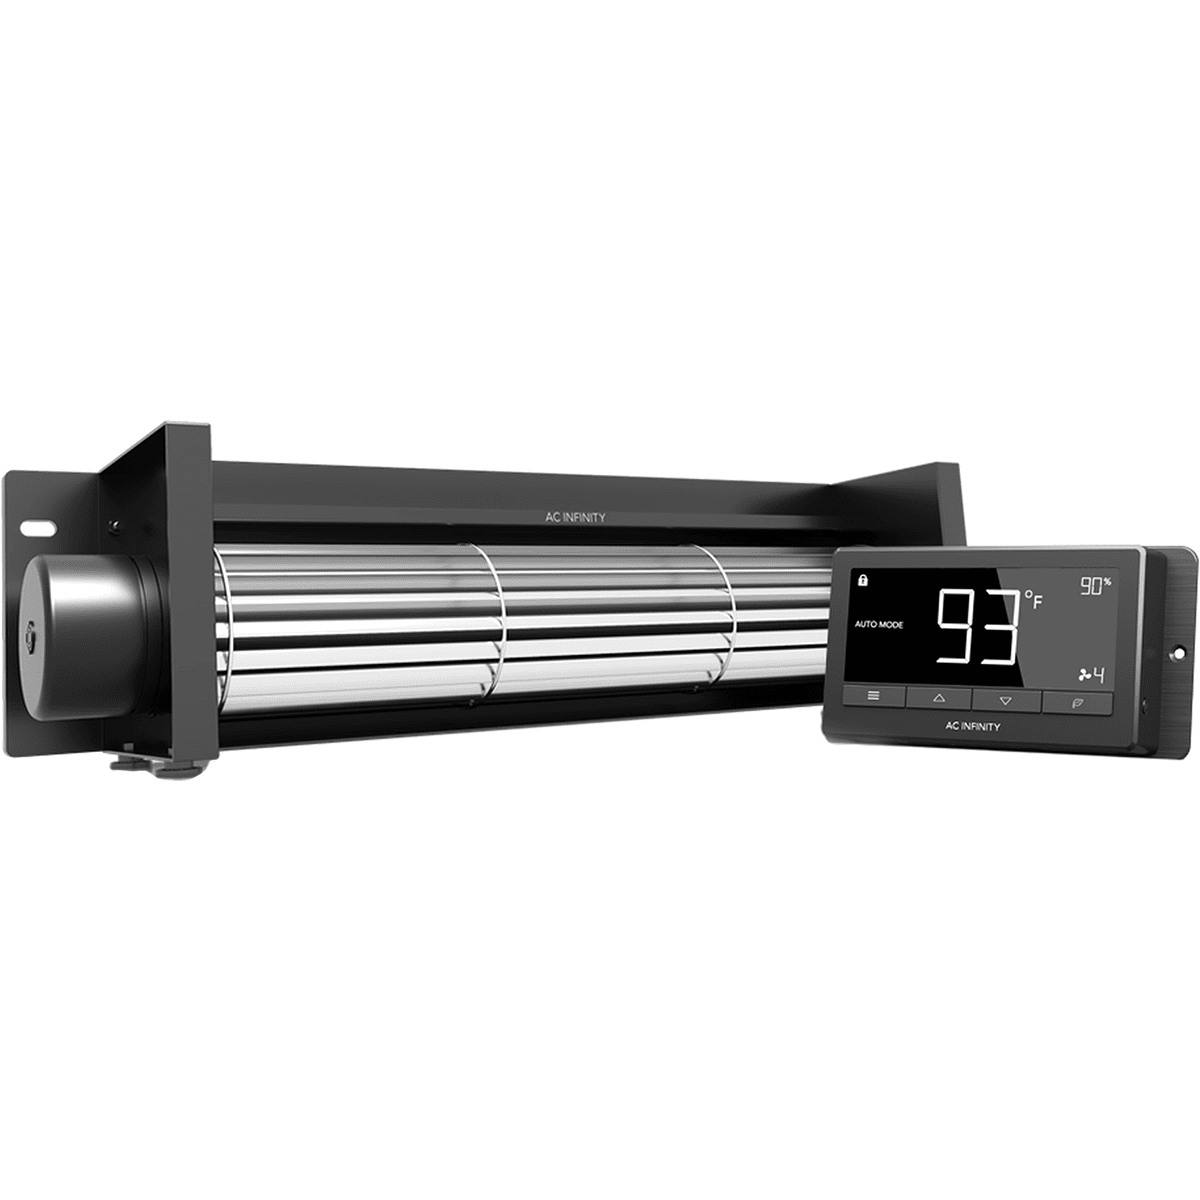 Image of Ac Infinity Airblaze Fireplace Blower Fan W- Temperature & Humidity Control - 14